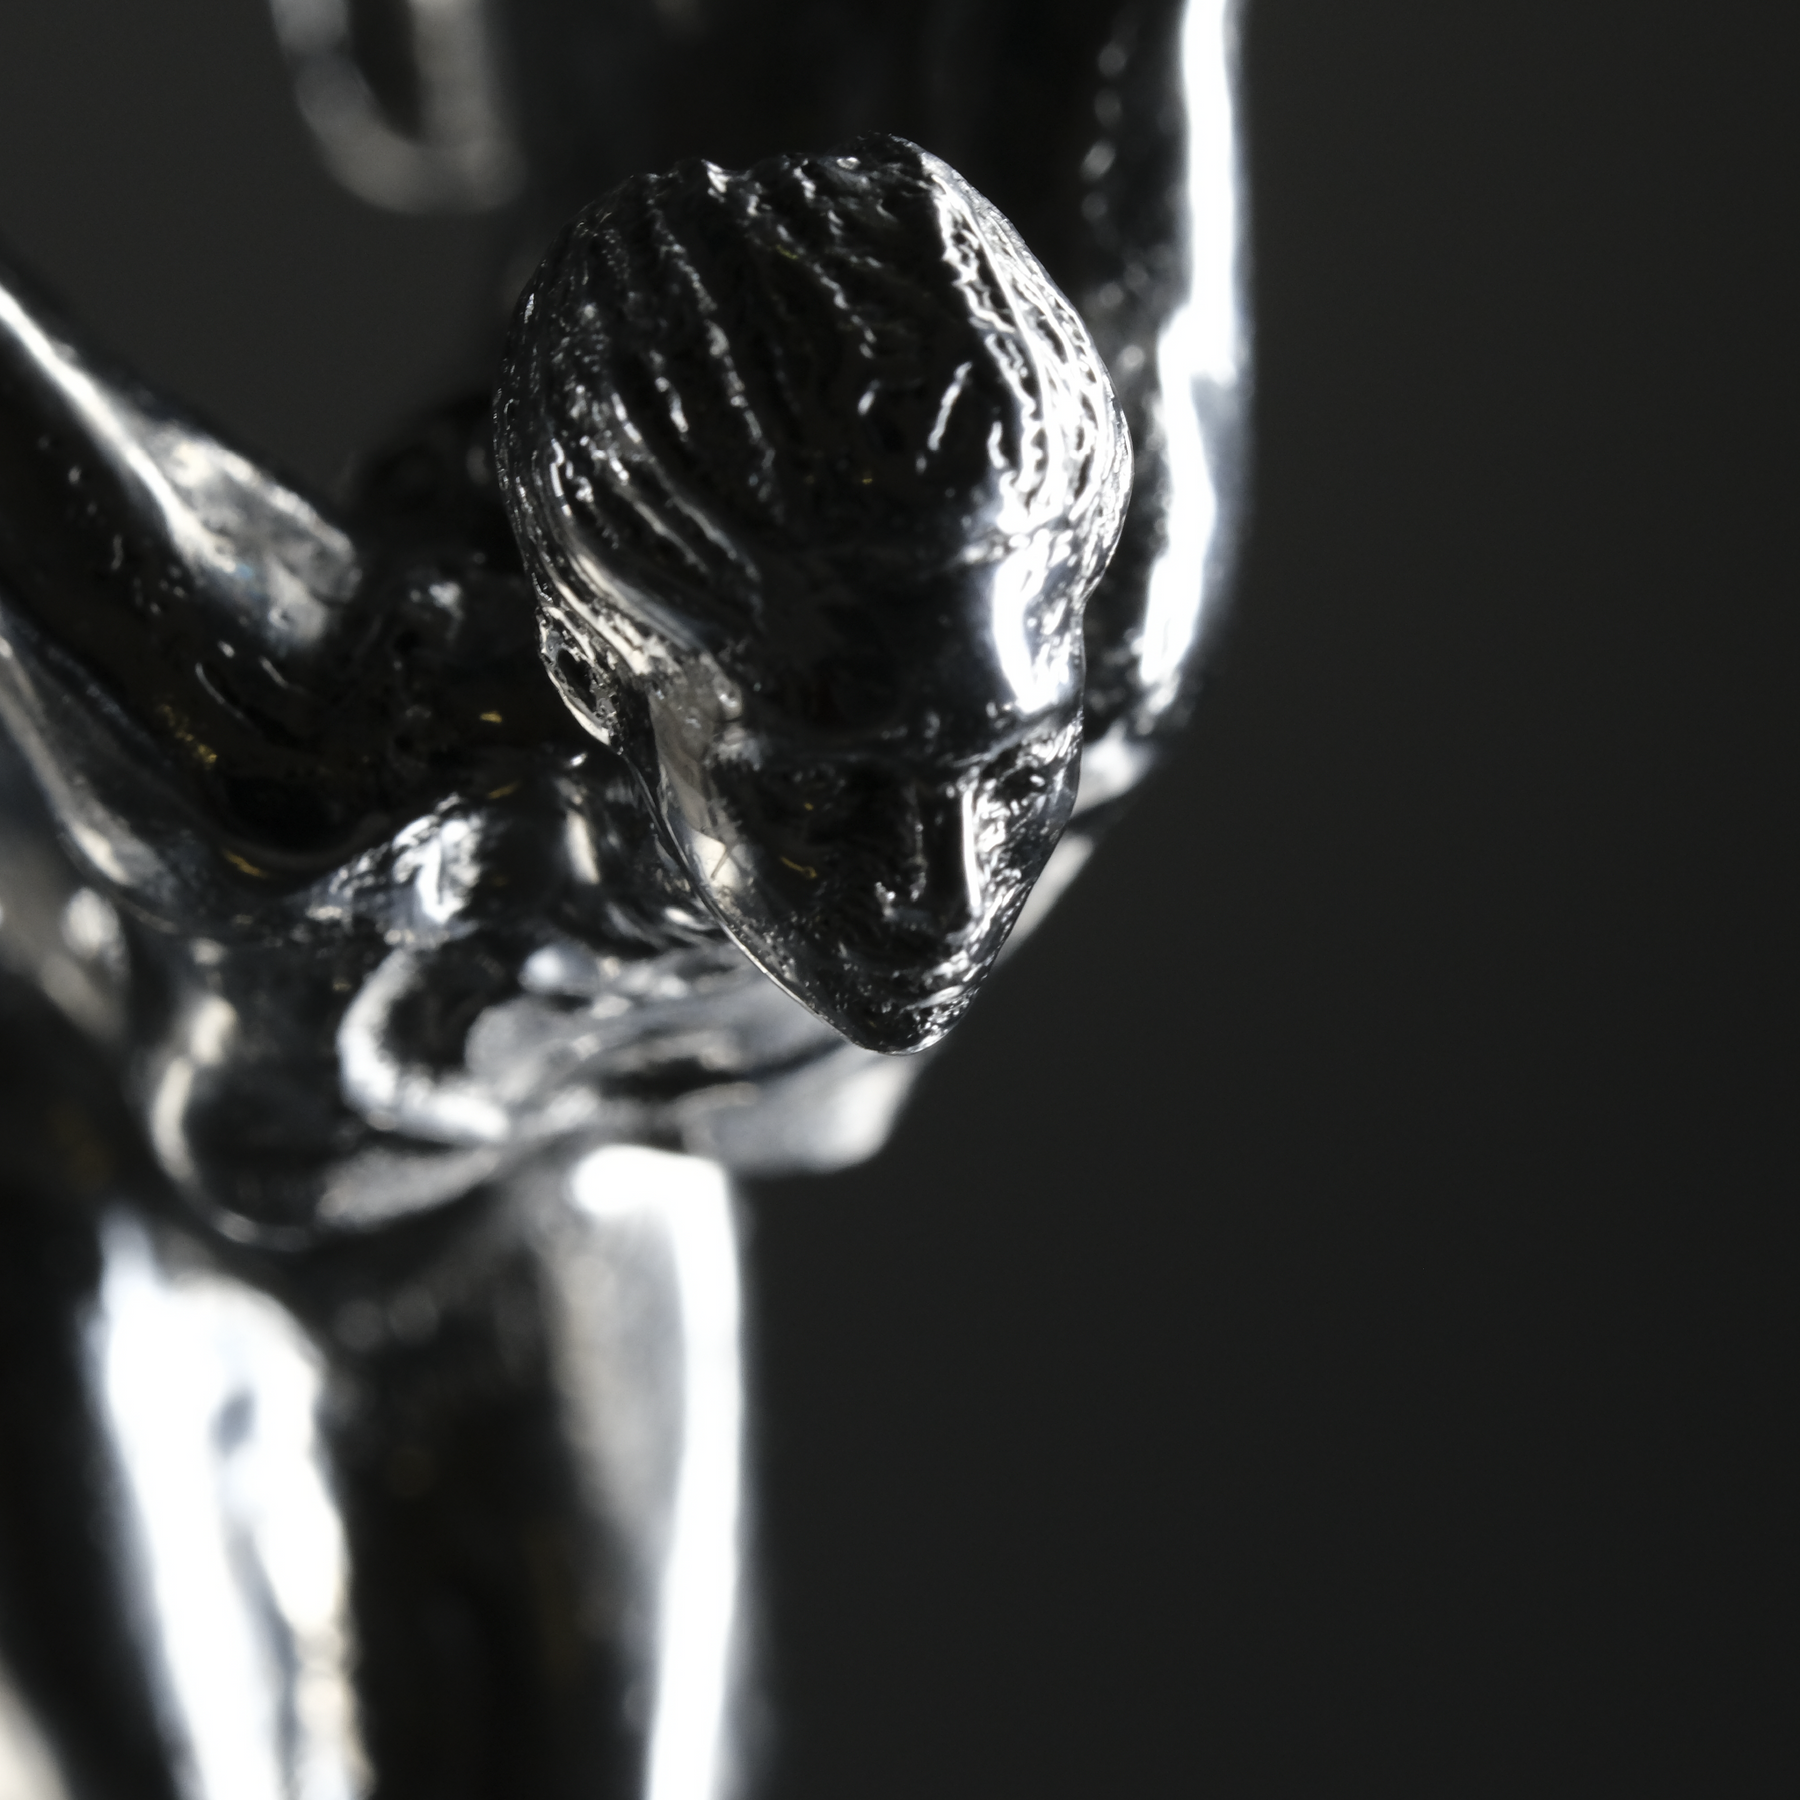 Picture of a 3D printed and then post processed female figure, high polish. The figure strongly resembles "Spirit of Ecstasy", a figurine on the front of Rolls Royce cars. 